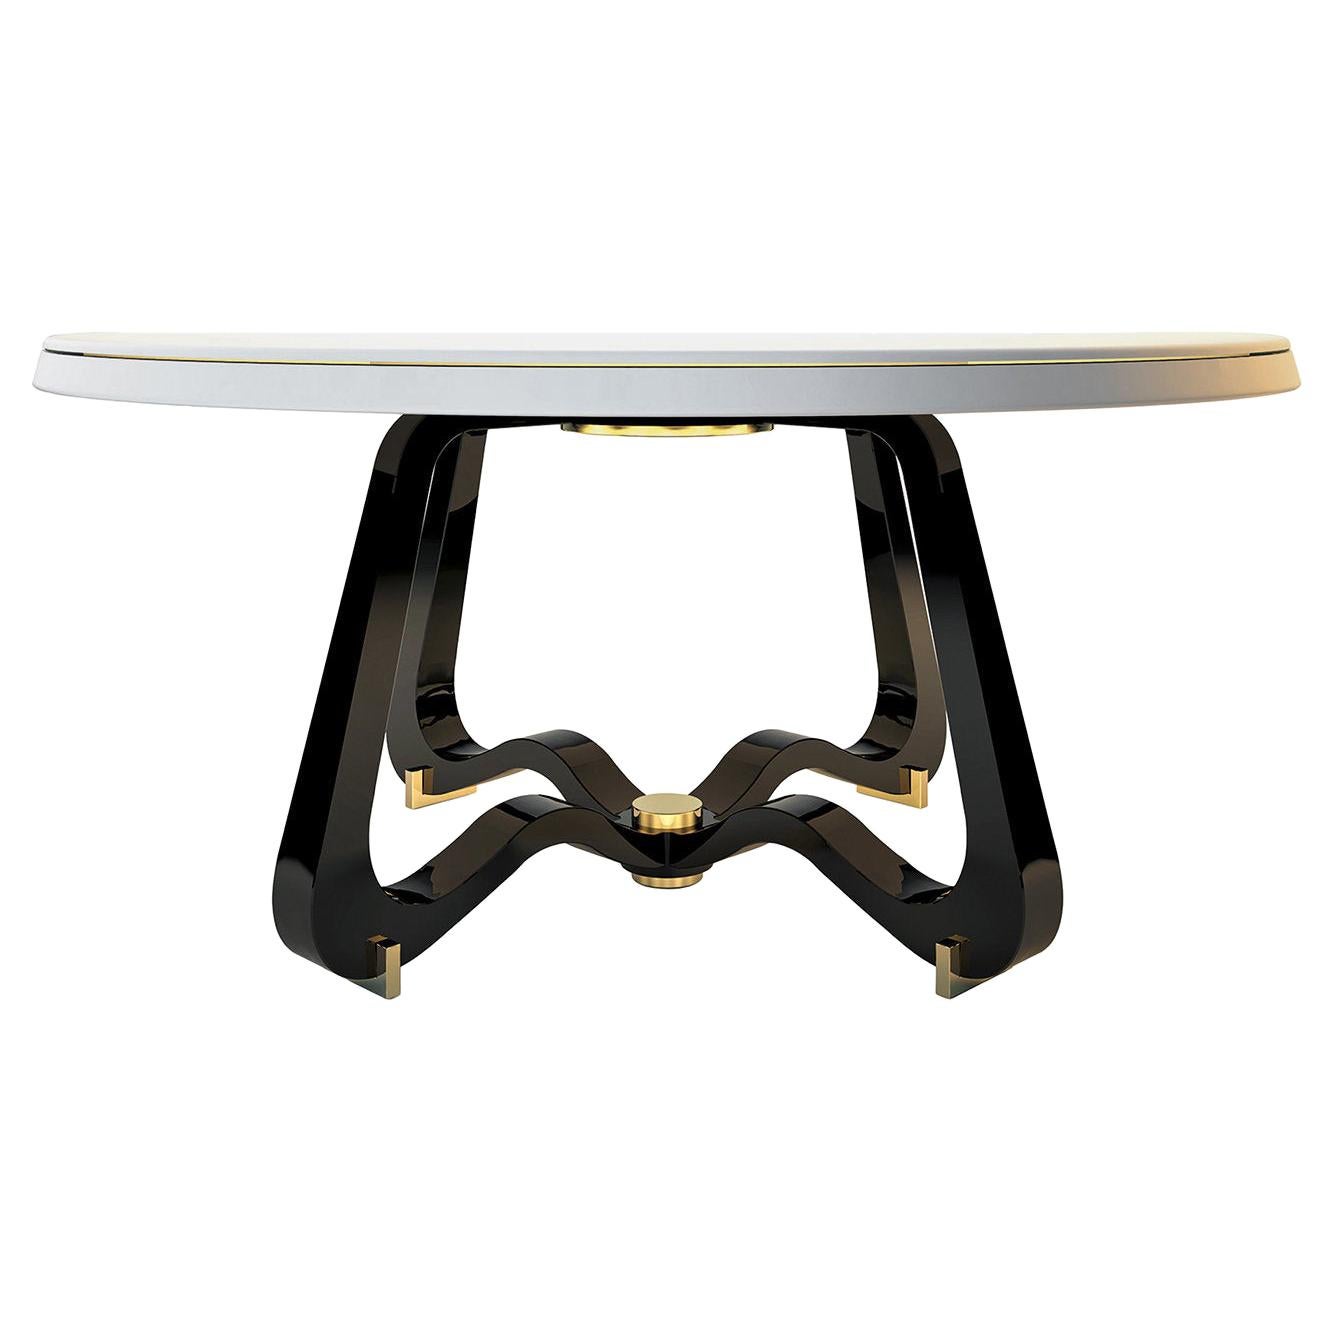 Wilde Dining Table #2 By Giannella Ventura